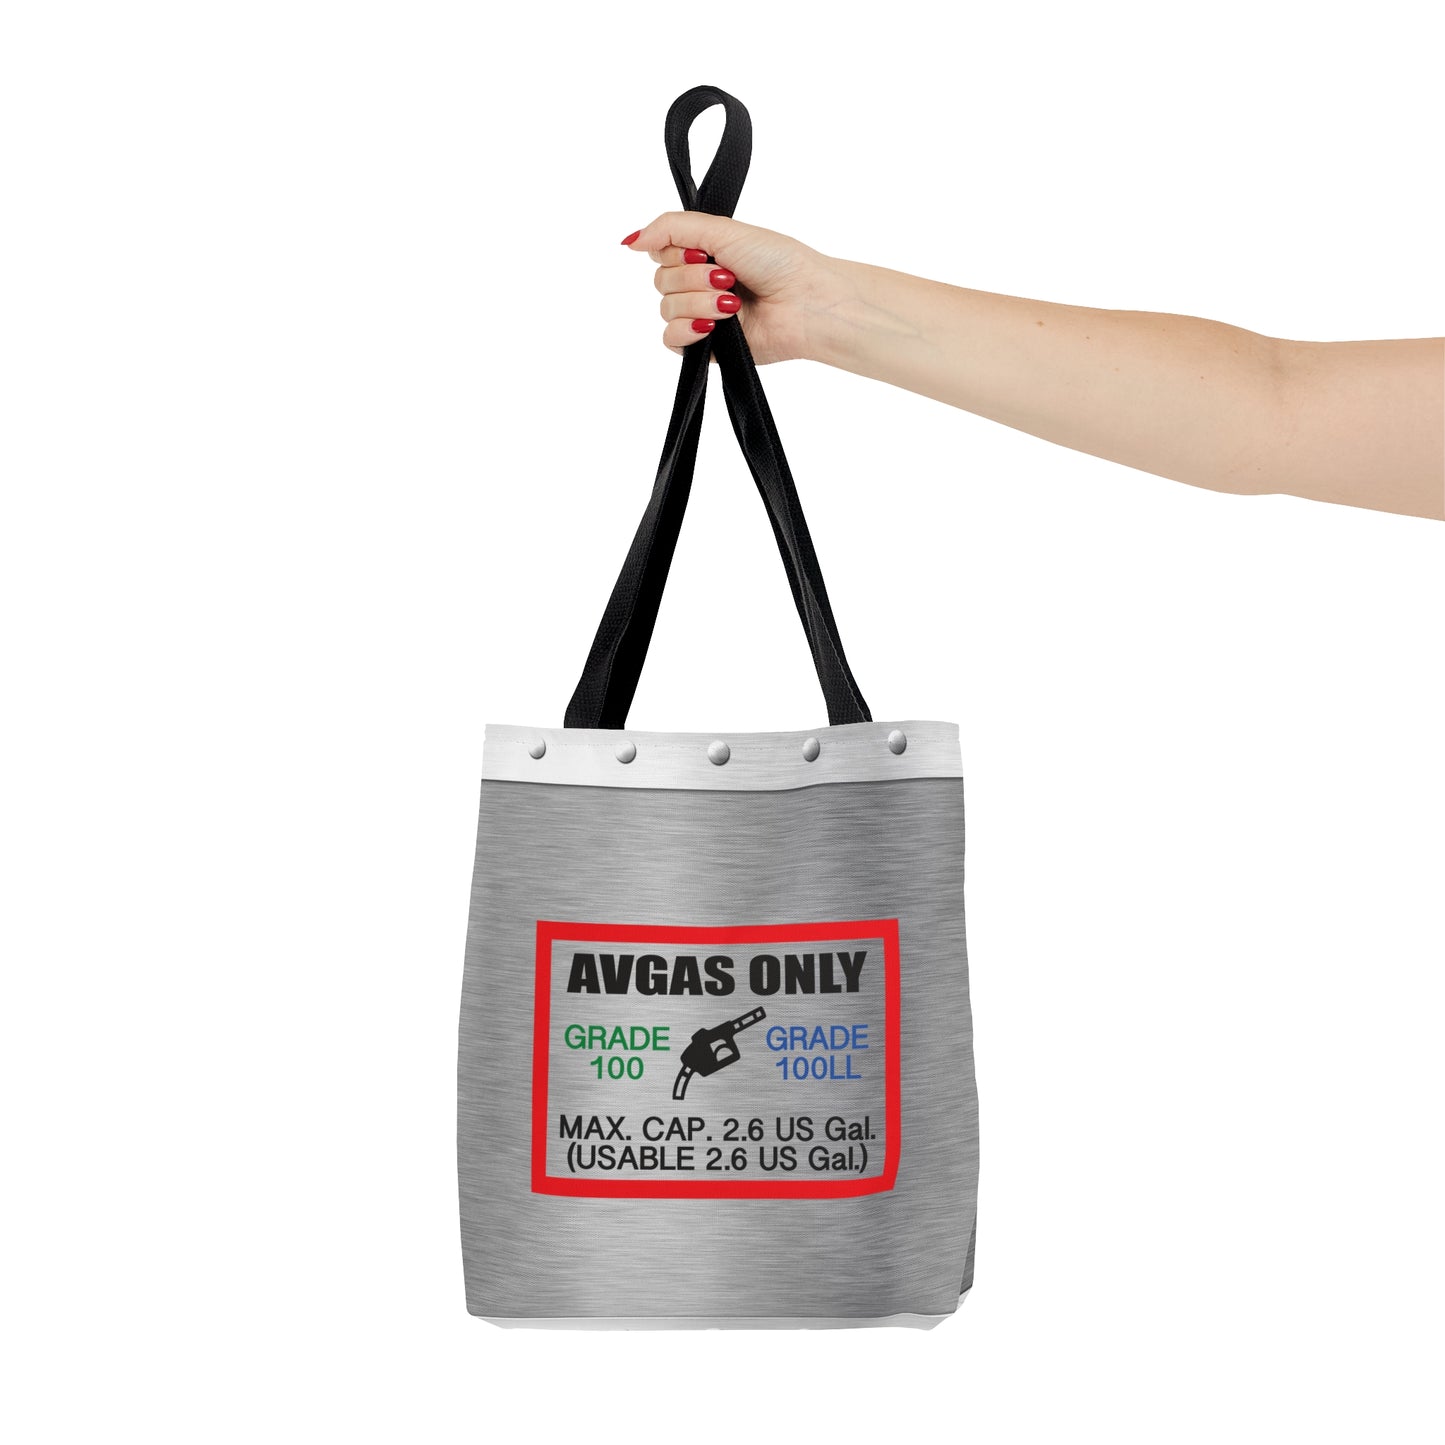 Avgas Only 100LL tote bag